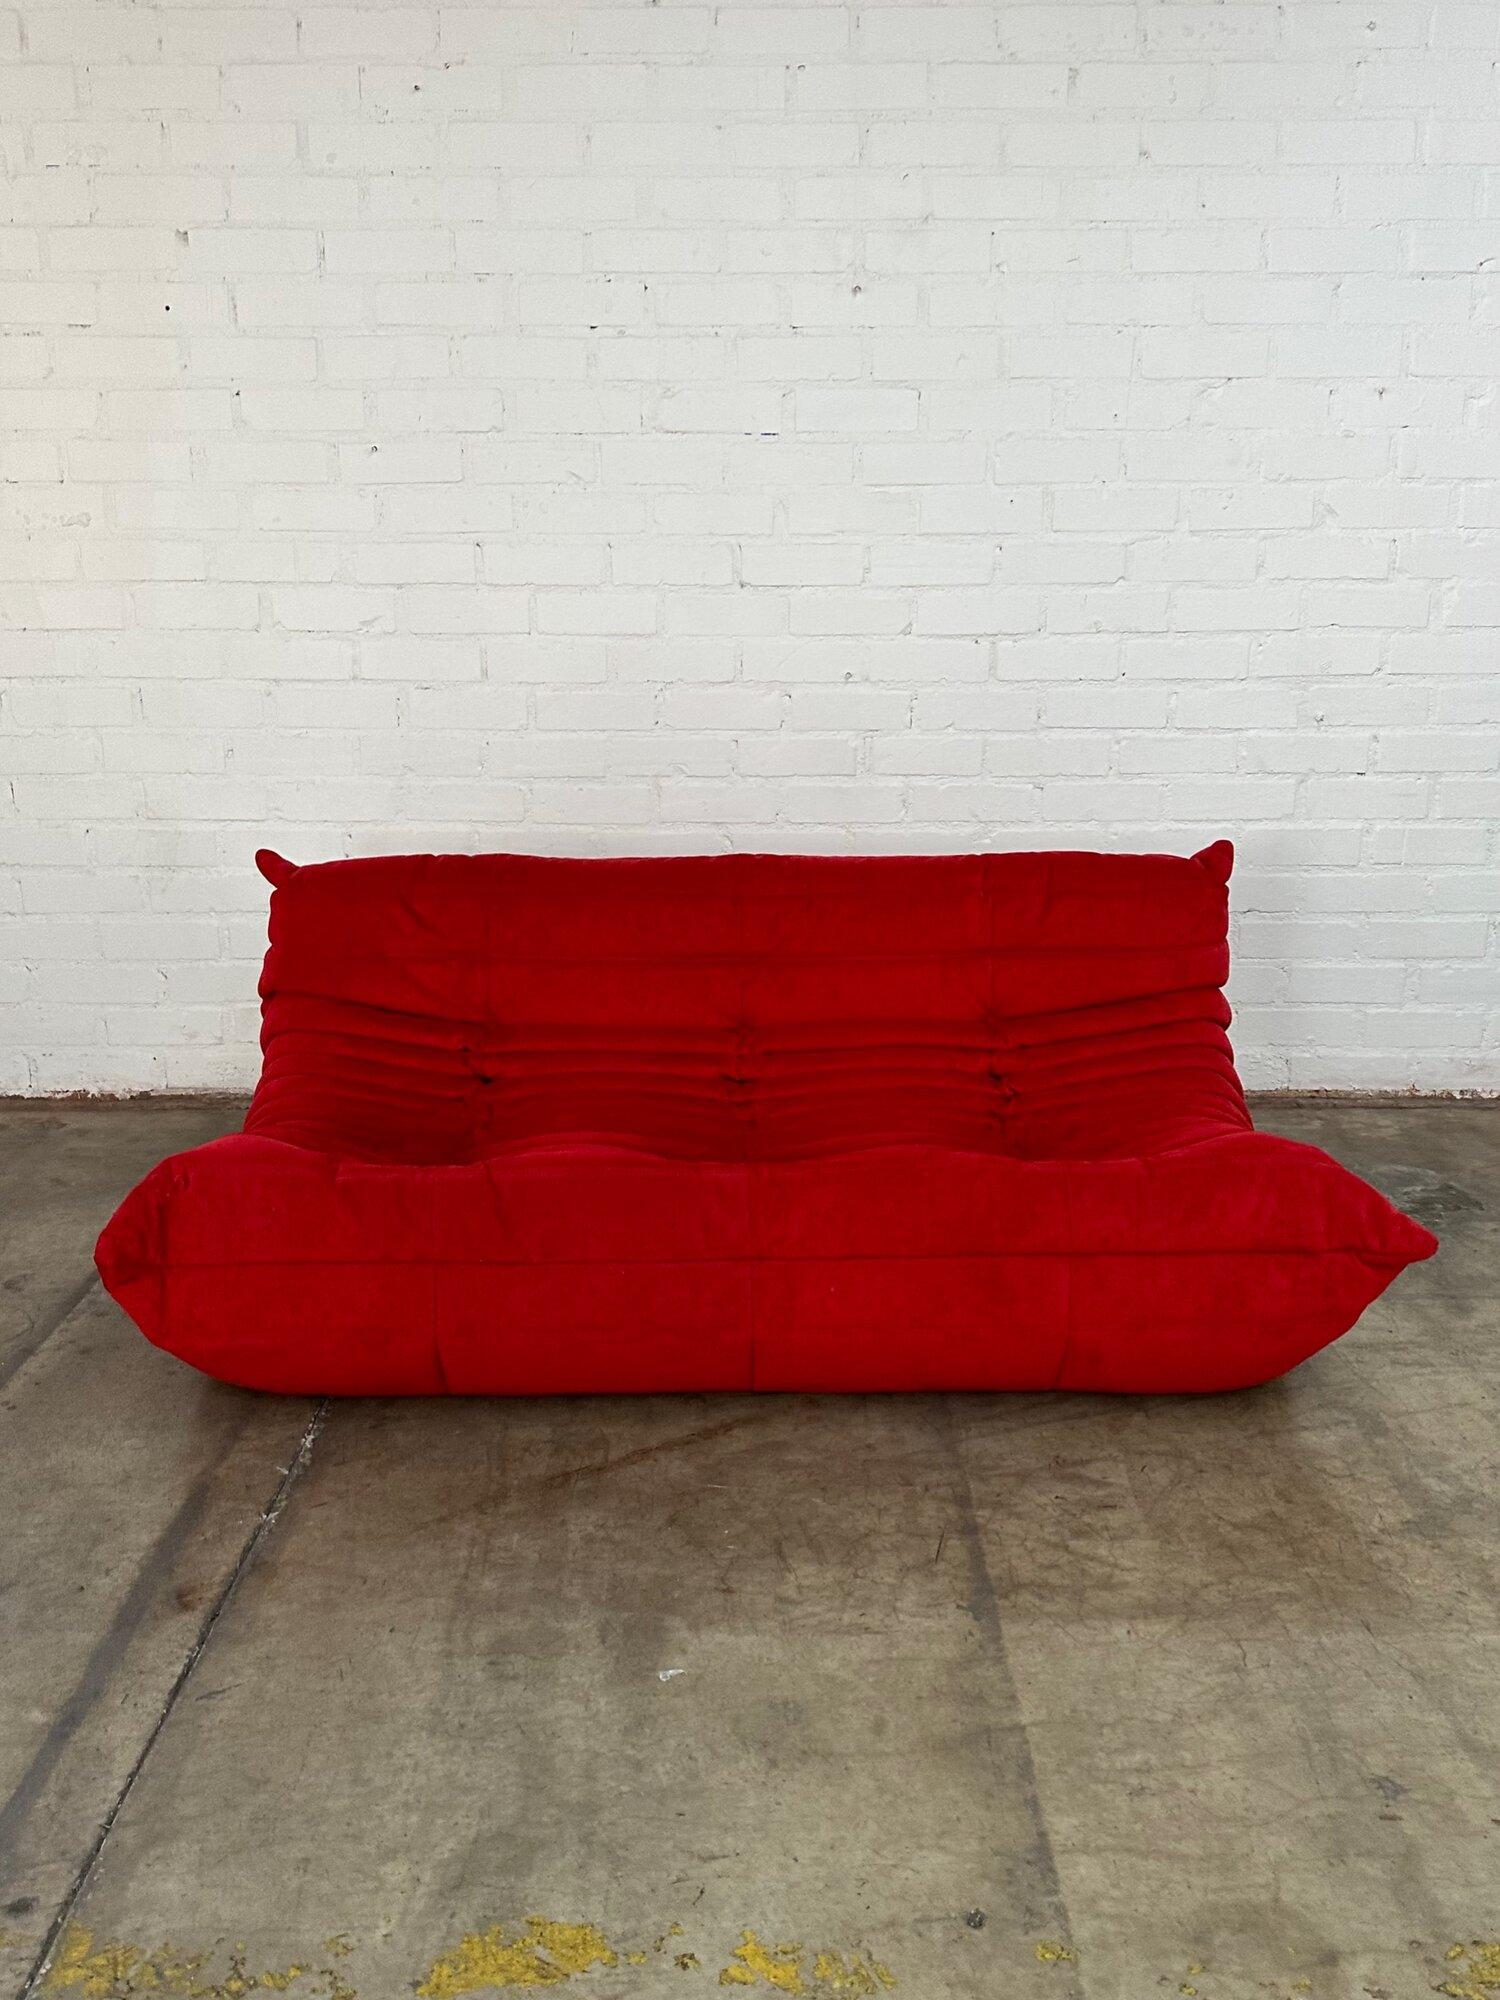 W66 D39 H28 SW65 SD22 SH15

Authentic Ligne Roset Togo sofa in Goya Red Alcantra. Item is in great condition used only for staging. Fabric is clean with no rips or tears. 

